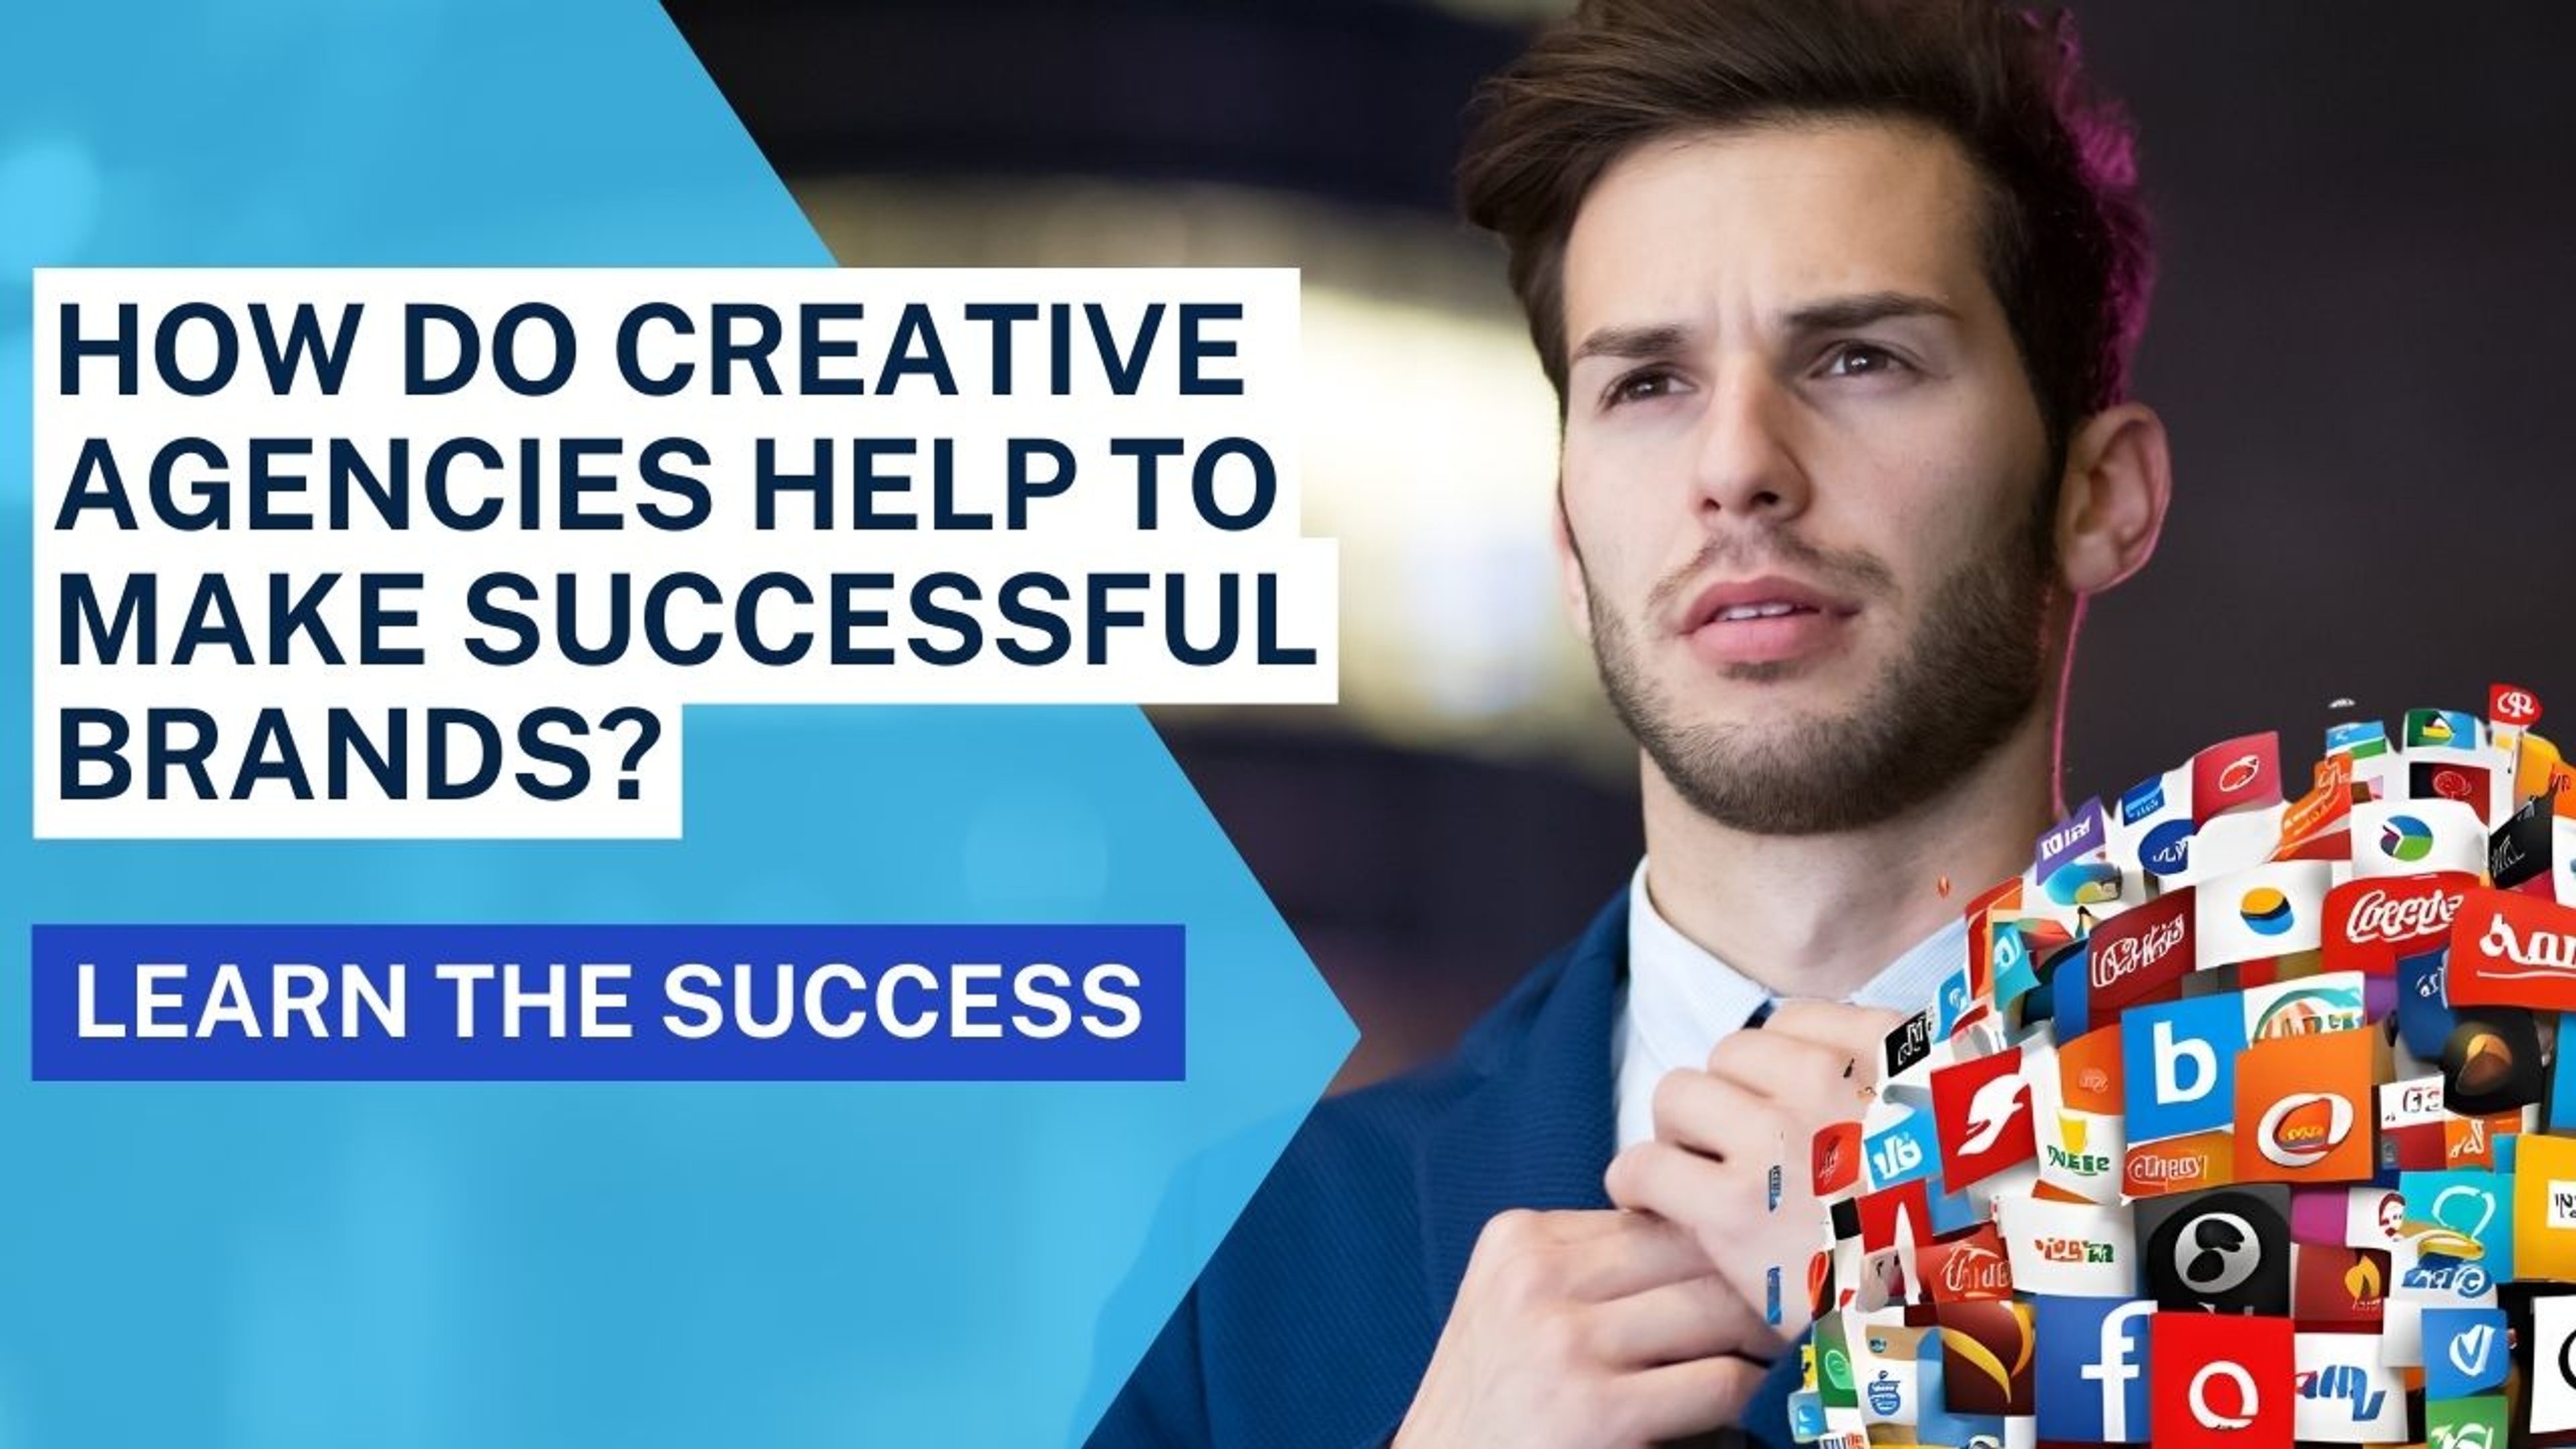 How Does Creative Agencies Help Brands To Make Sucessful?